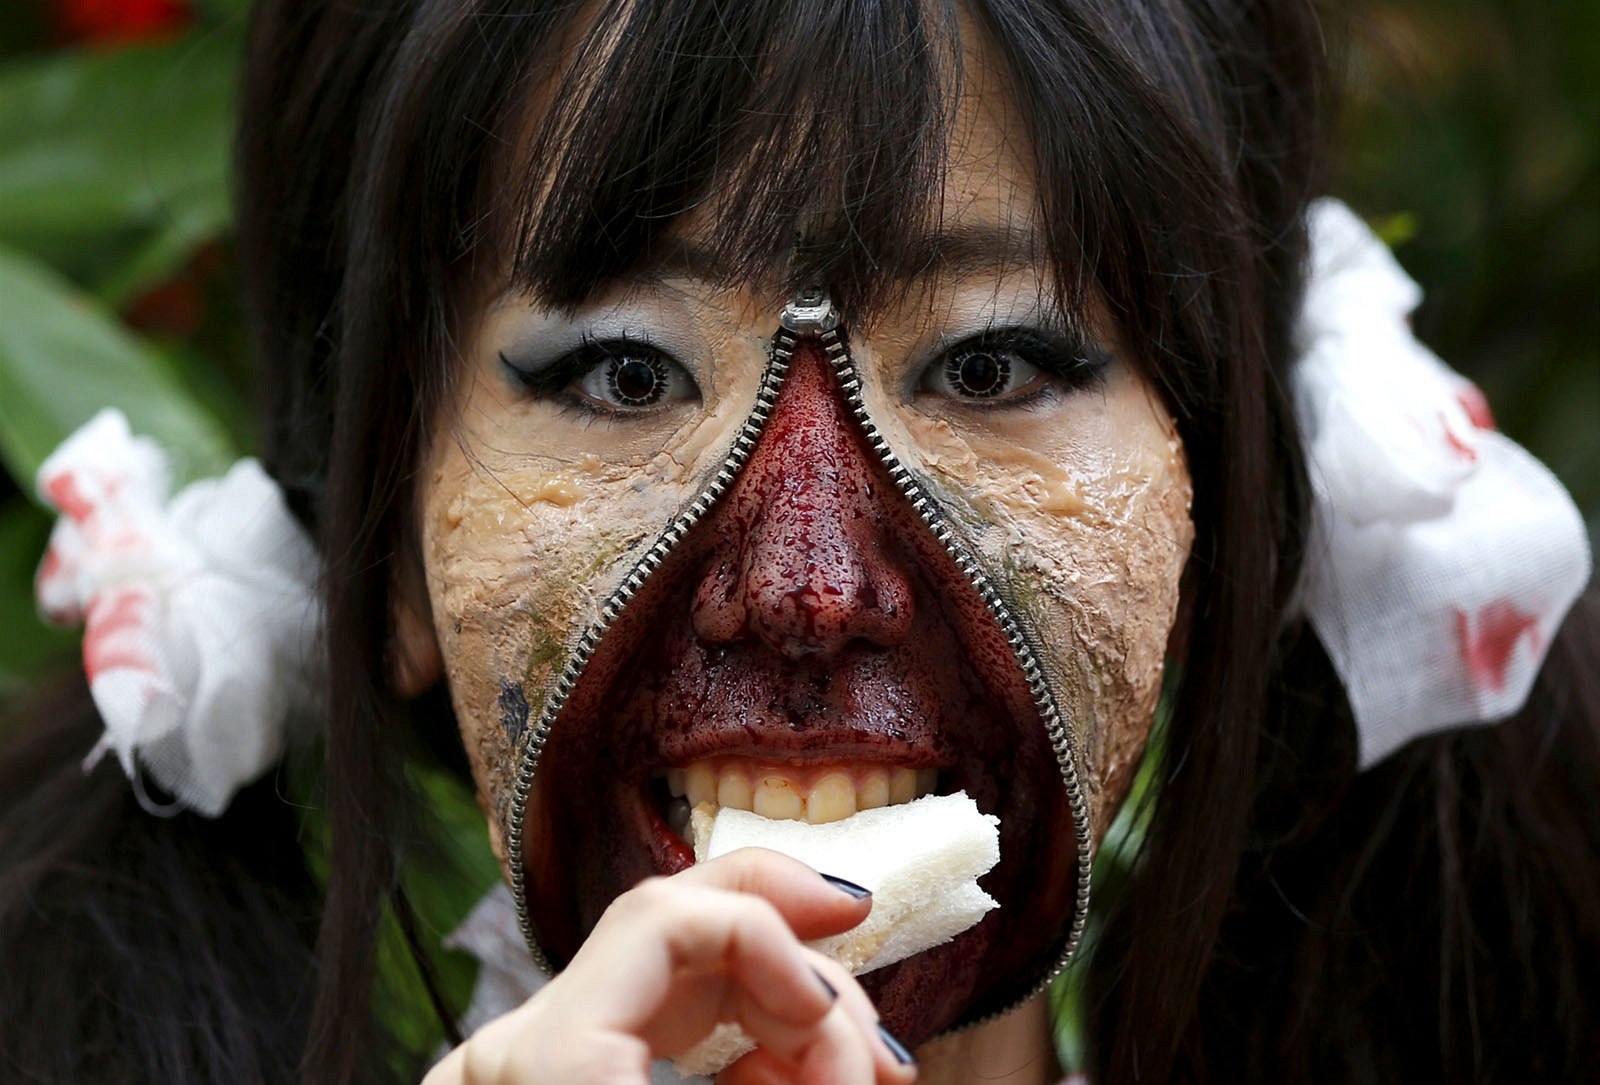 A participant in costume eats a sandwich after a Halloween parade in Kawasaki, south of Tokyo, on Oct. 26. More than 100,000 spectators turned up to watch the parade, where 2,500 participants dressed up in costumes.